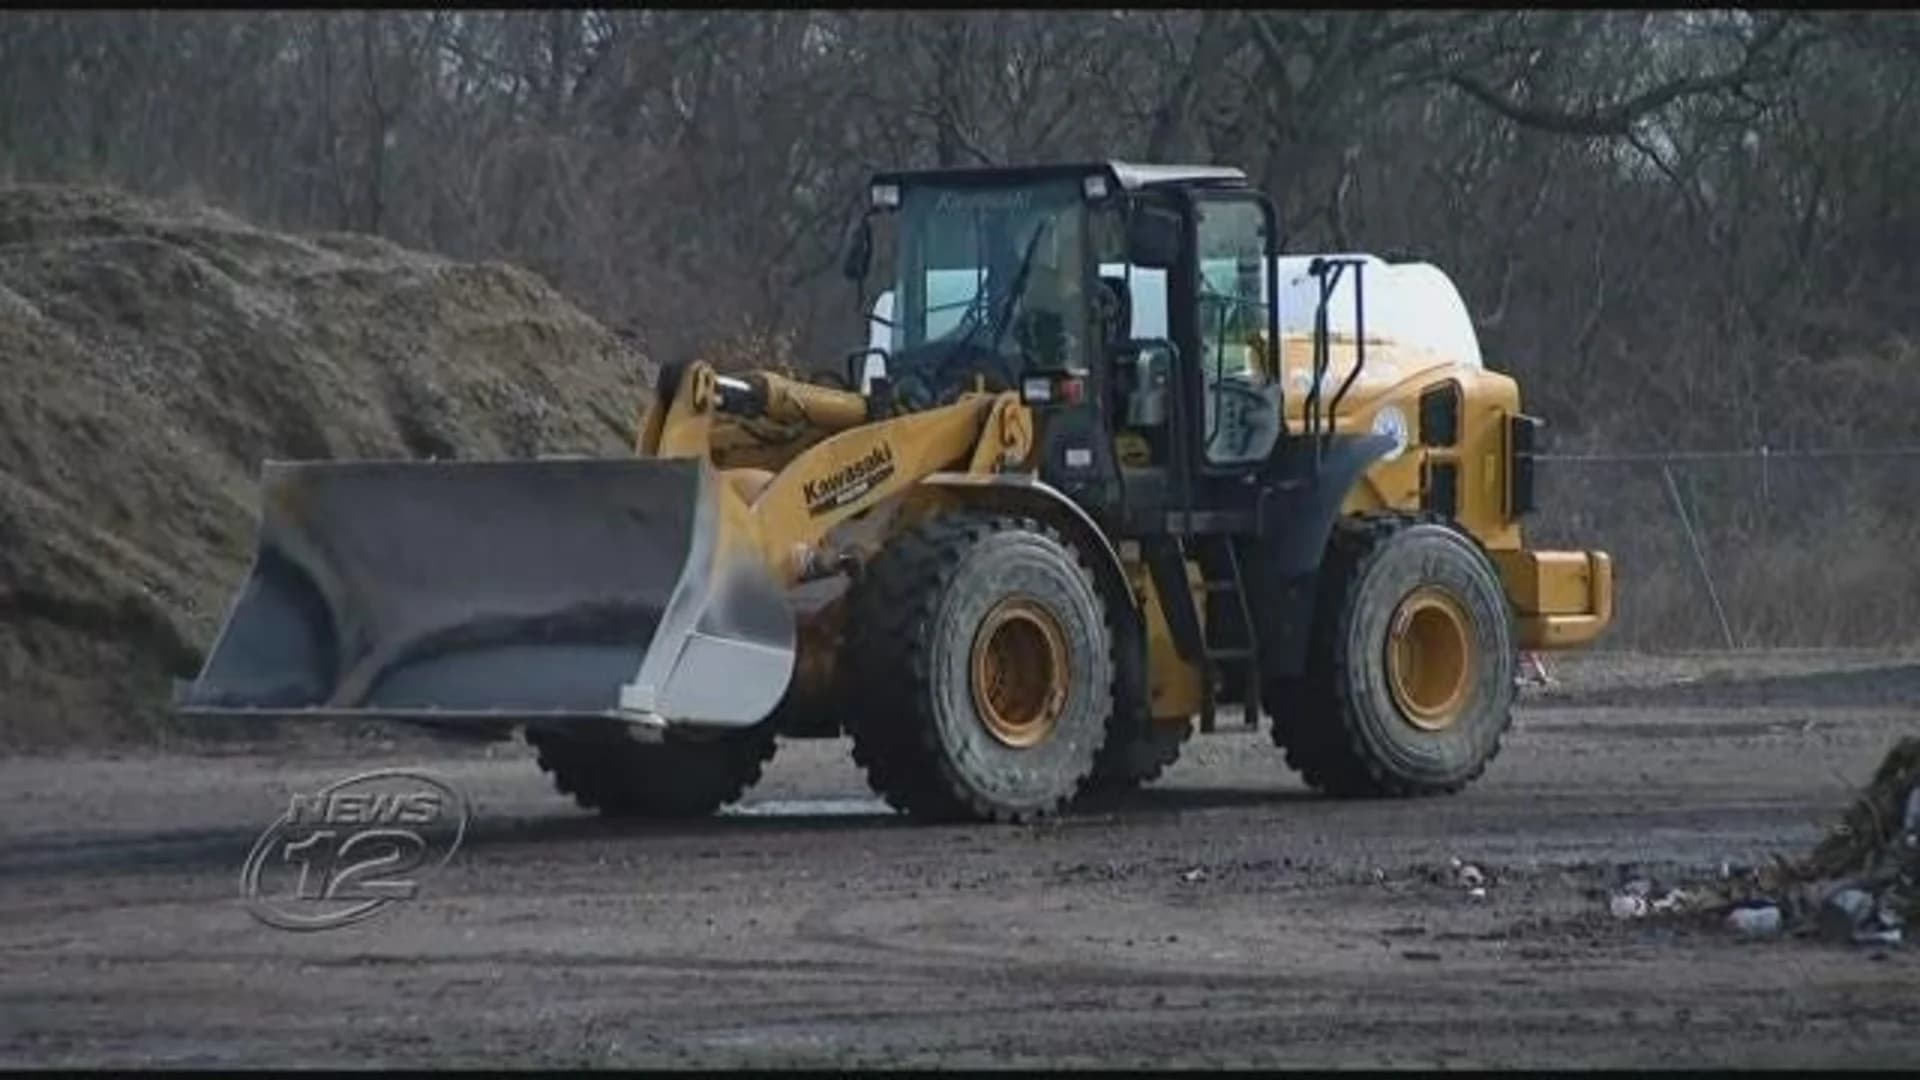 Officials: Nassau, Suffolk county ready for potential snowfall